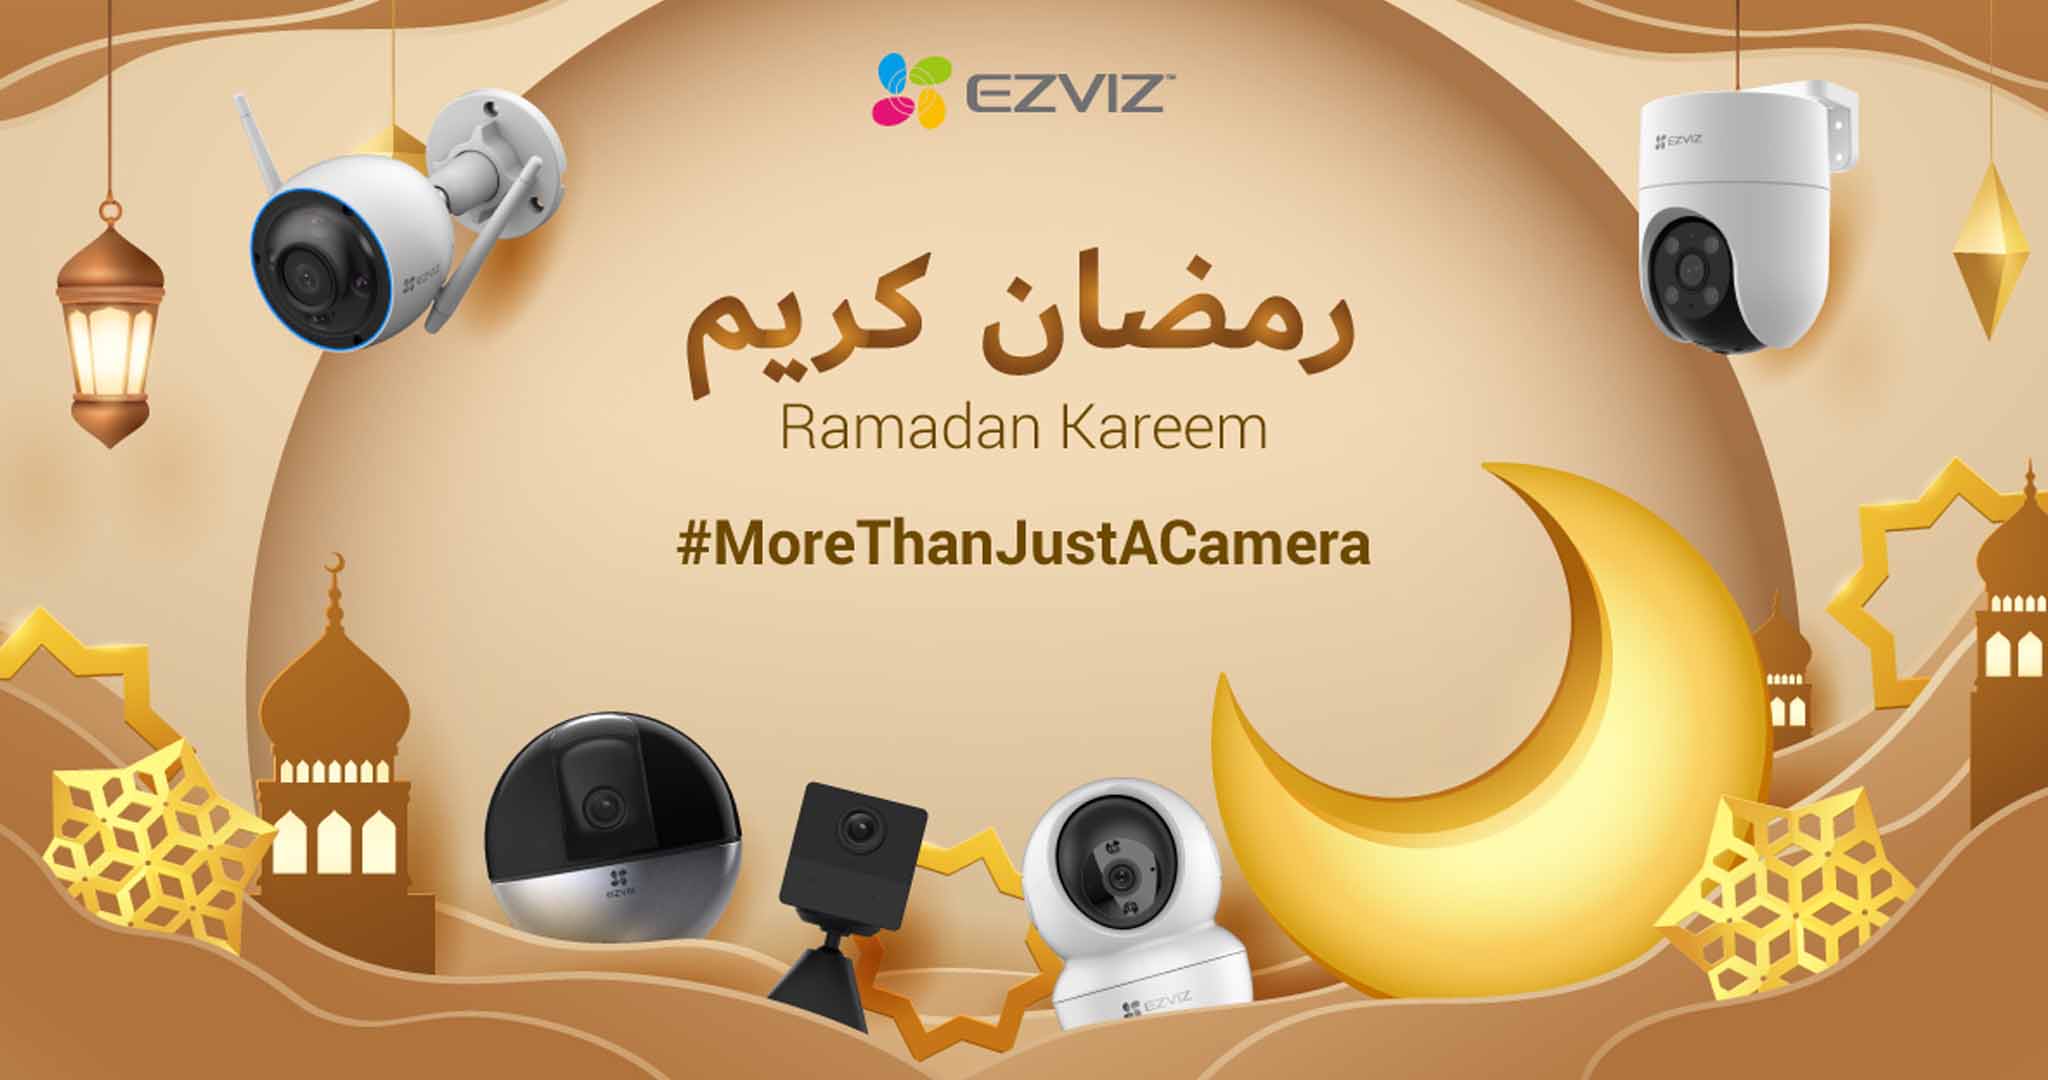 EZVIZ announces its exciting Ramadan campaign, echoing values of family companionship and caring with special offers on smart home gadgets